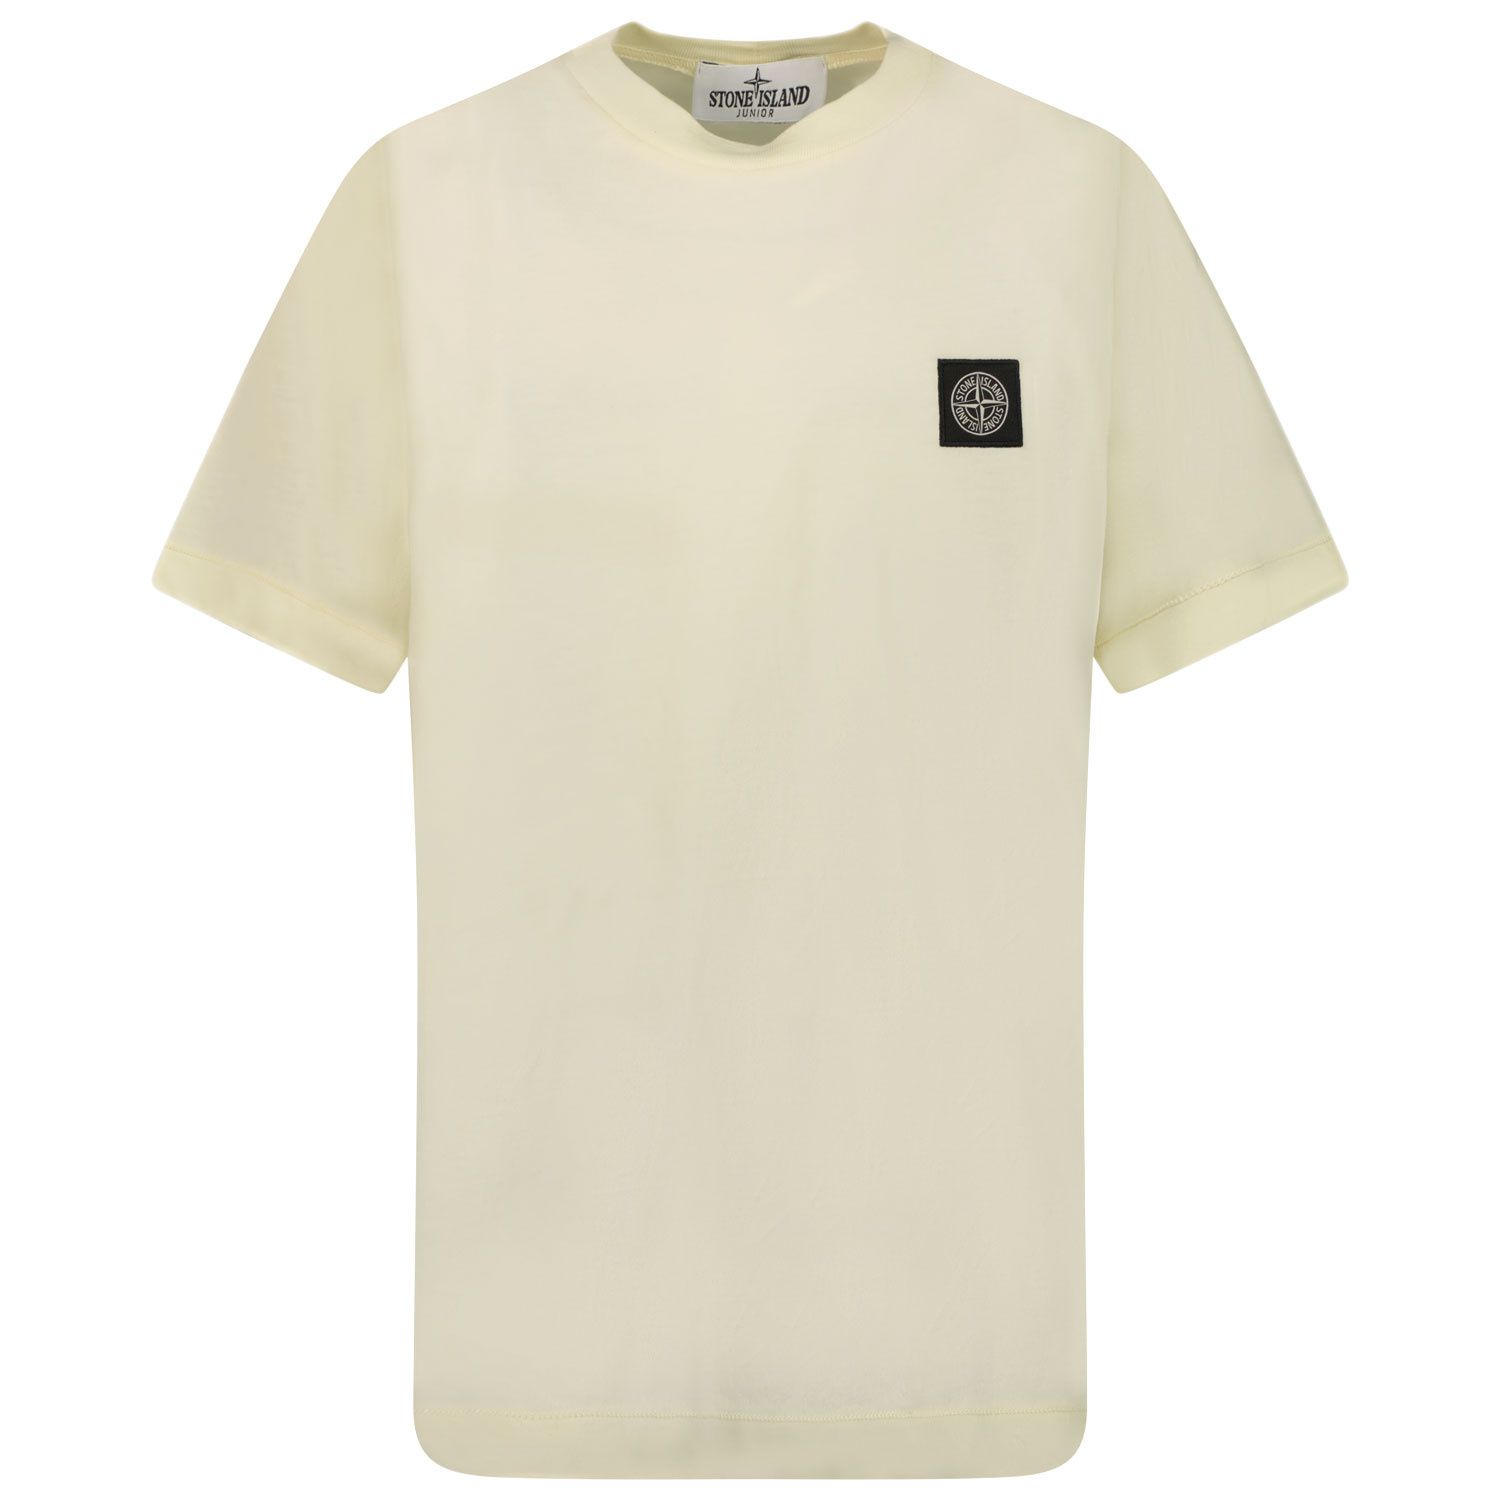 Picture of Stone Island 761620147 kids t-shirt soft yellow